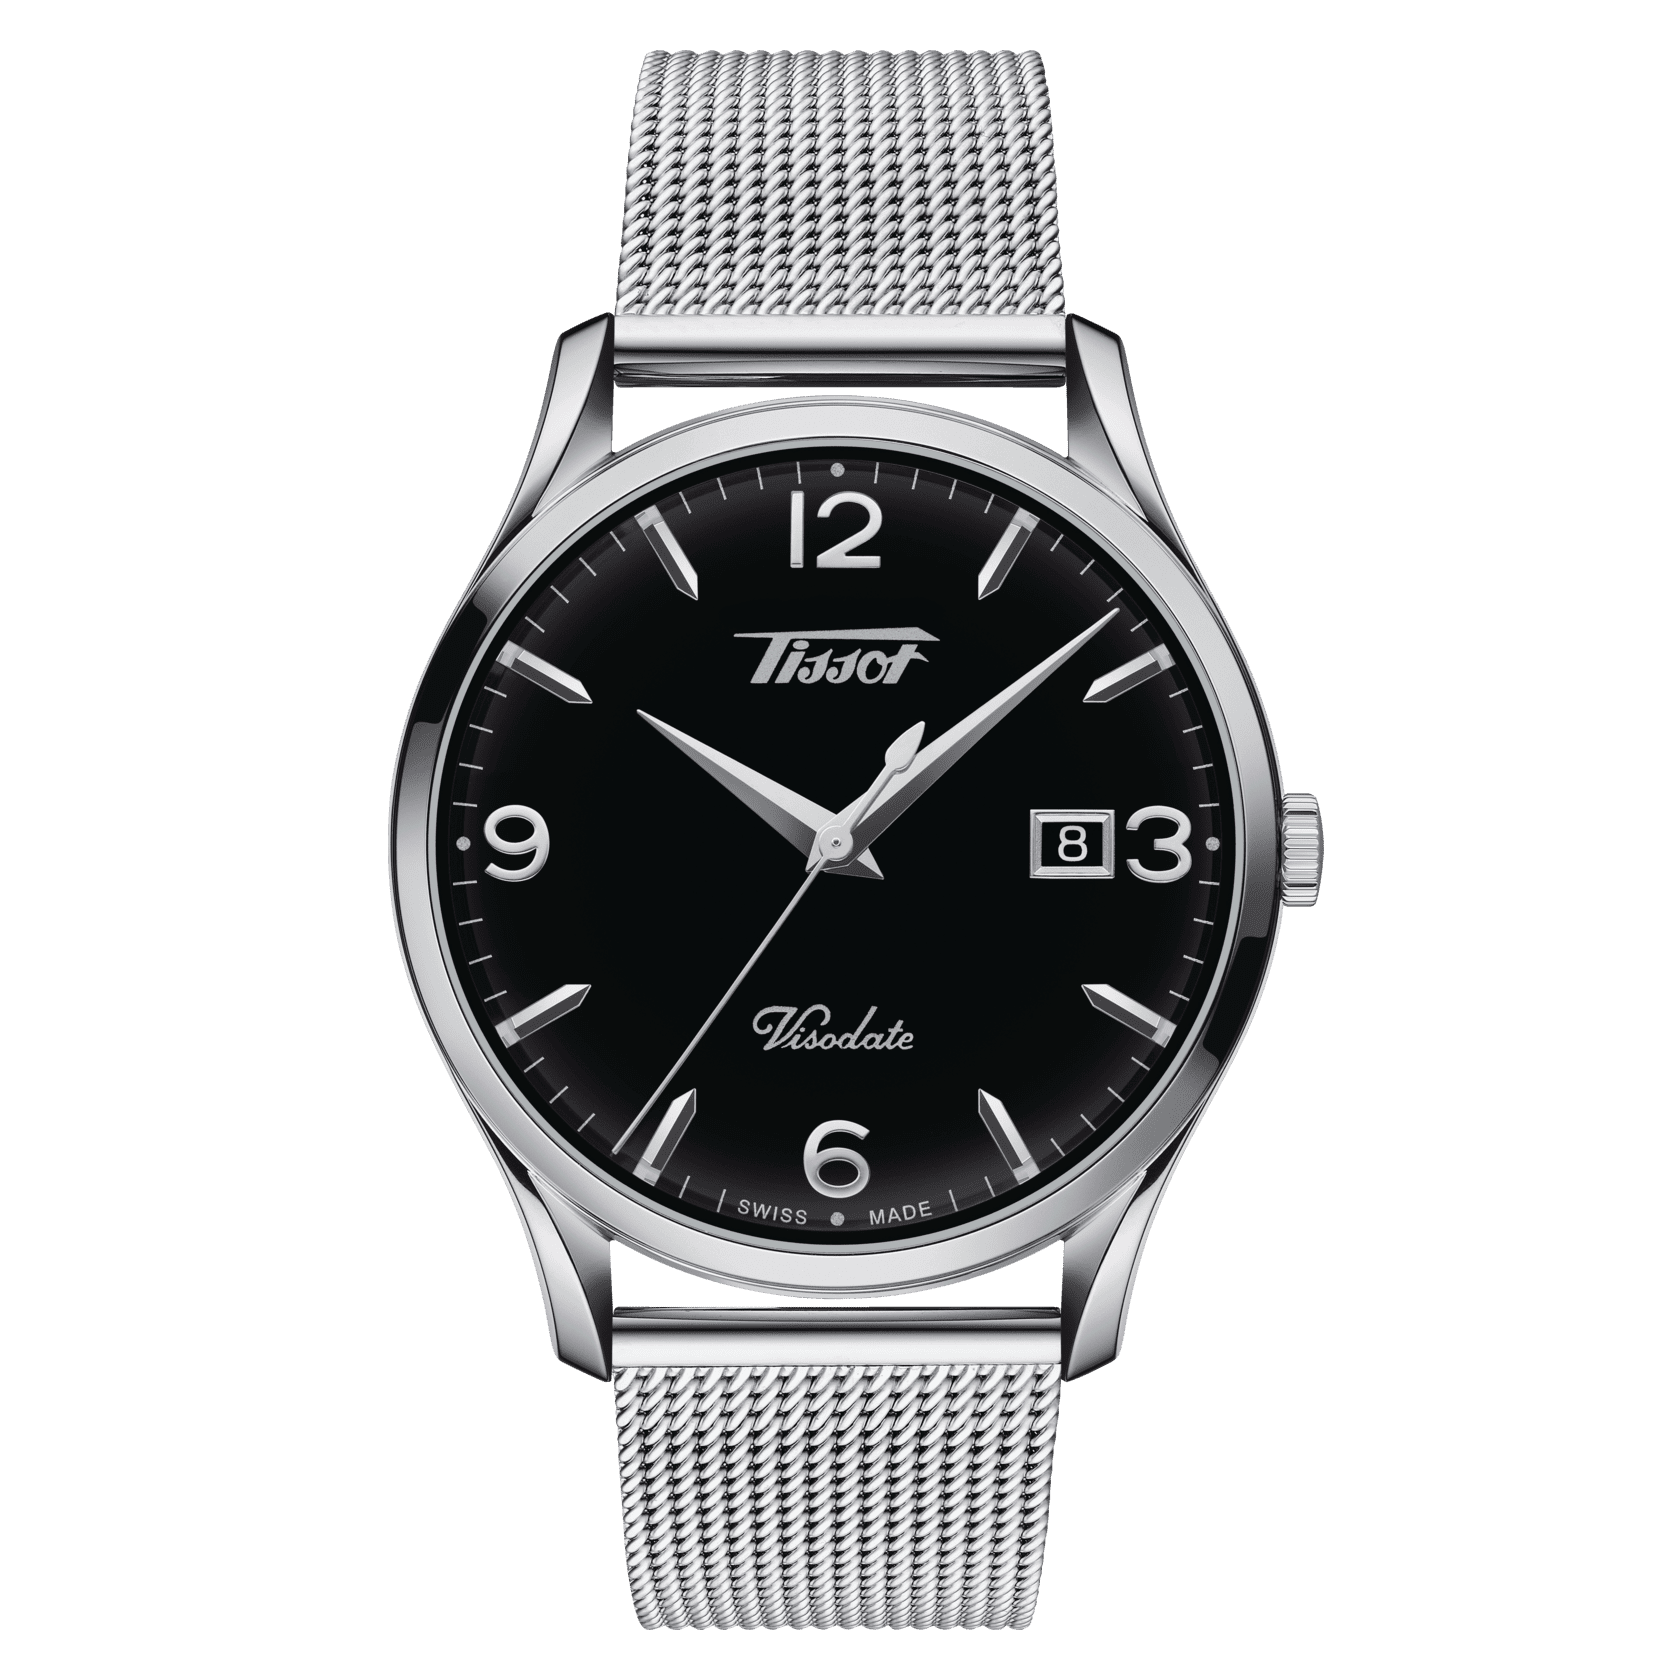 Tissot Heritage Visodate (T118.410.11.057.00)
40mm stainless steel case
Black dial
Silver-toned hands and indices
Arabic numerals
Date window
Swiss quartz movement
Domed scratch-resistant sapphire crystal
Water resistant to 30 meters
Stainless st